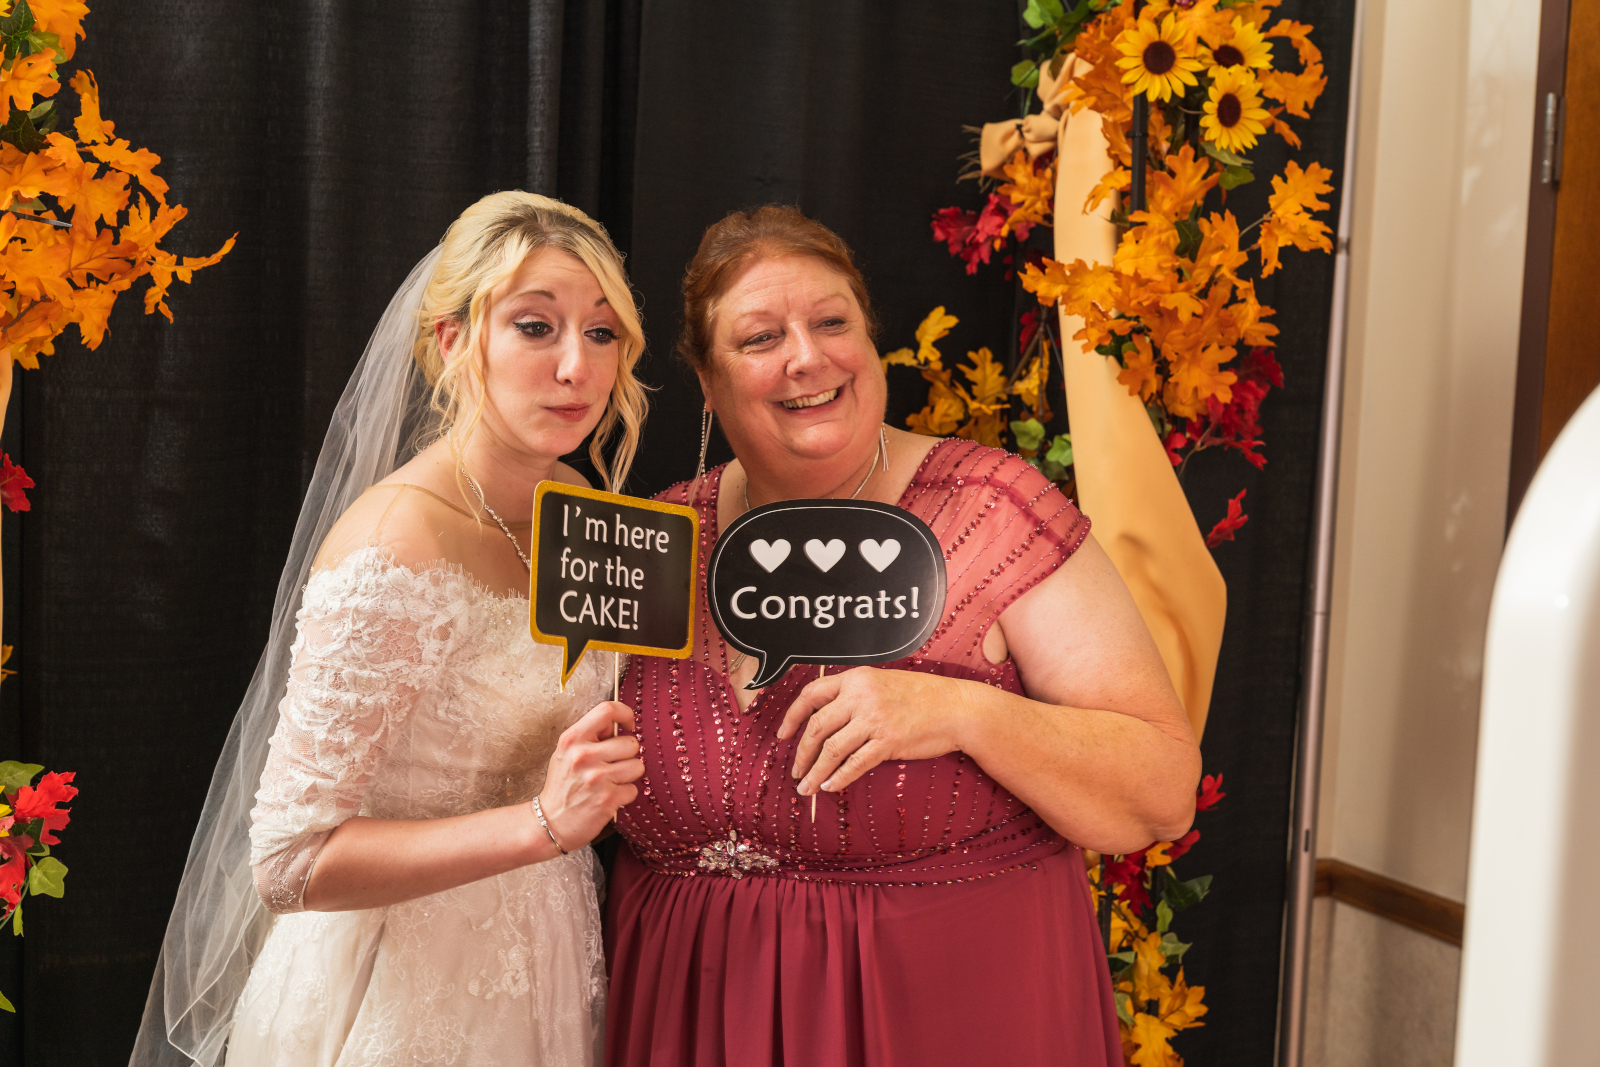 Bride and mom, mother of the bride, photo booth, props, signs, smile, pose, candid, fall wedding, cute fall wedding reception at Grand Pacific Wedding Gardens